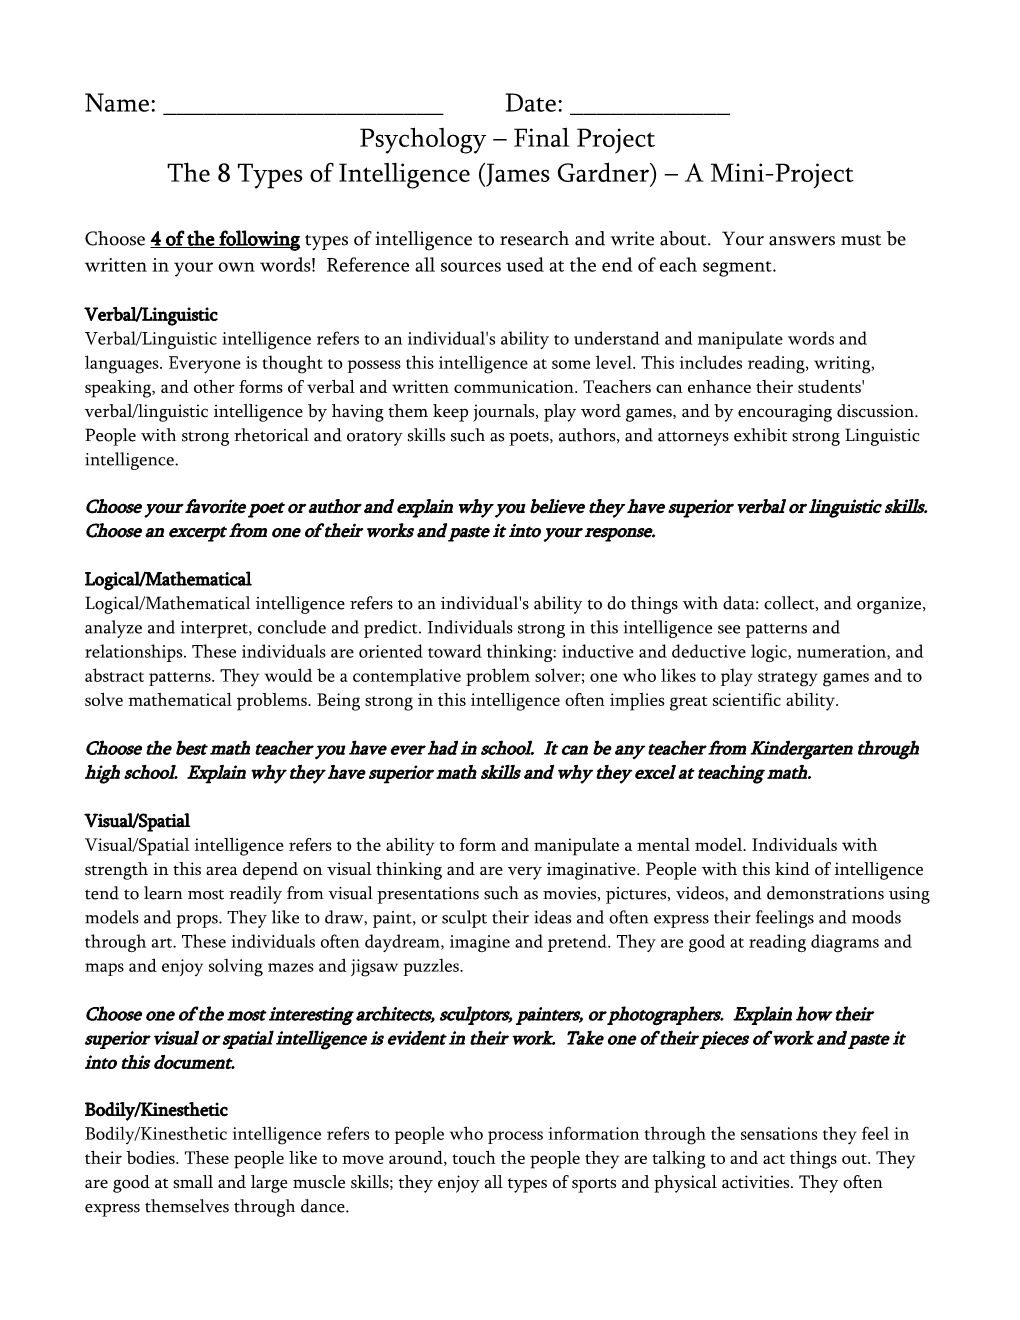 The 8 Types of Intelligence (James Gardner) a Mini-Project